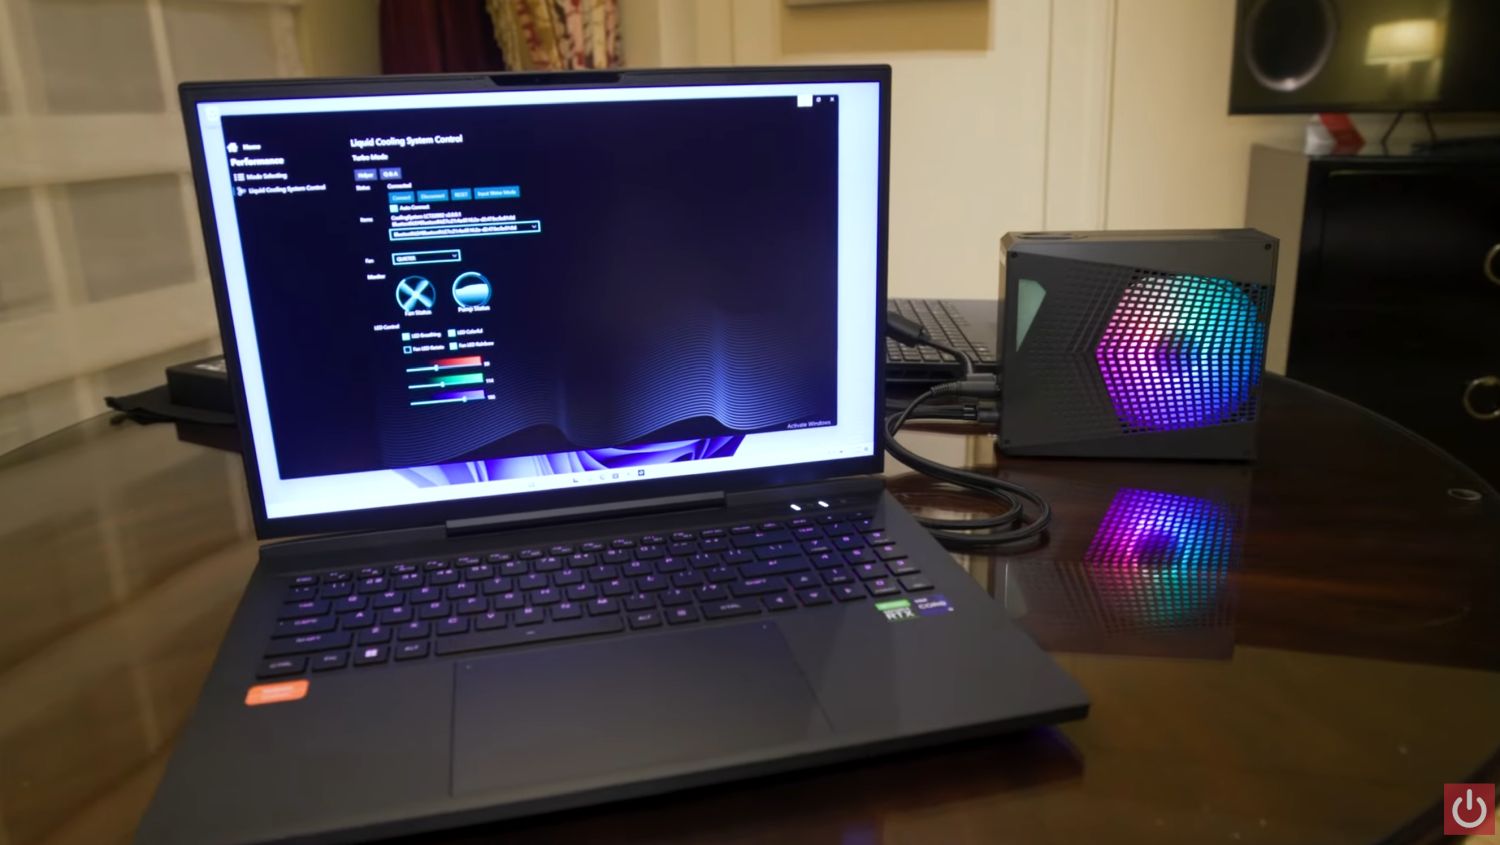 CyberPower just made liquid-cooled laptops dead simple